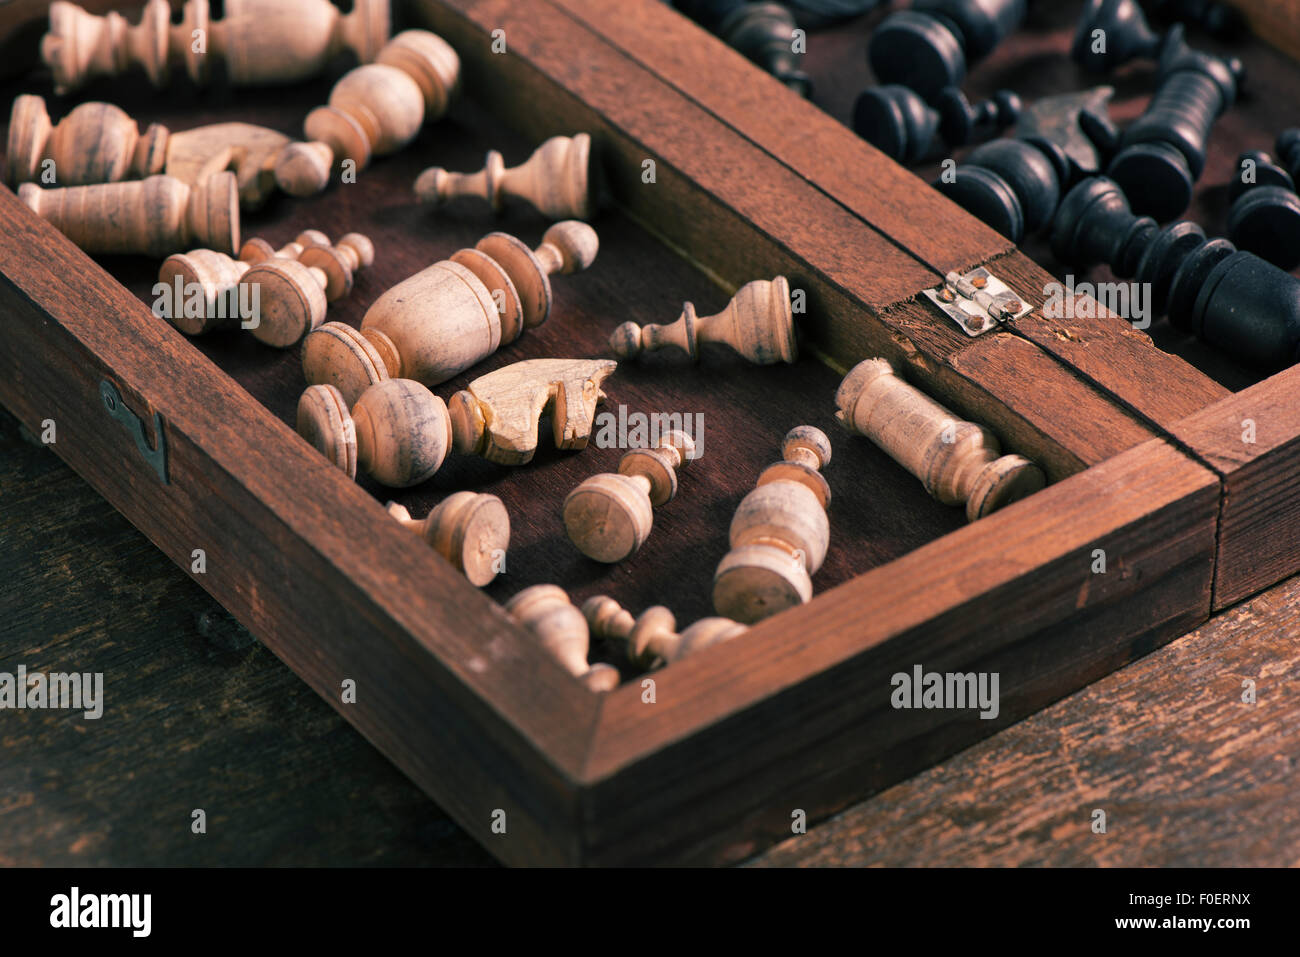 Chess pieces in wooden box. Conceptual image of strategy and competition. Stock Photo